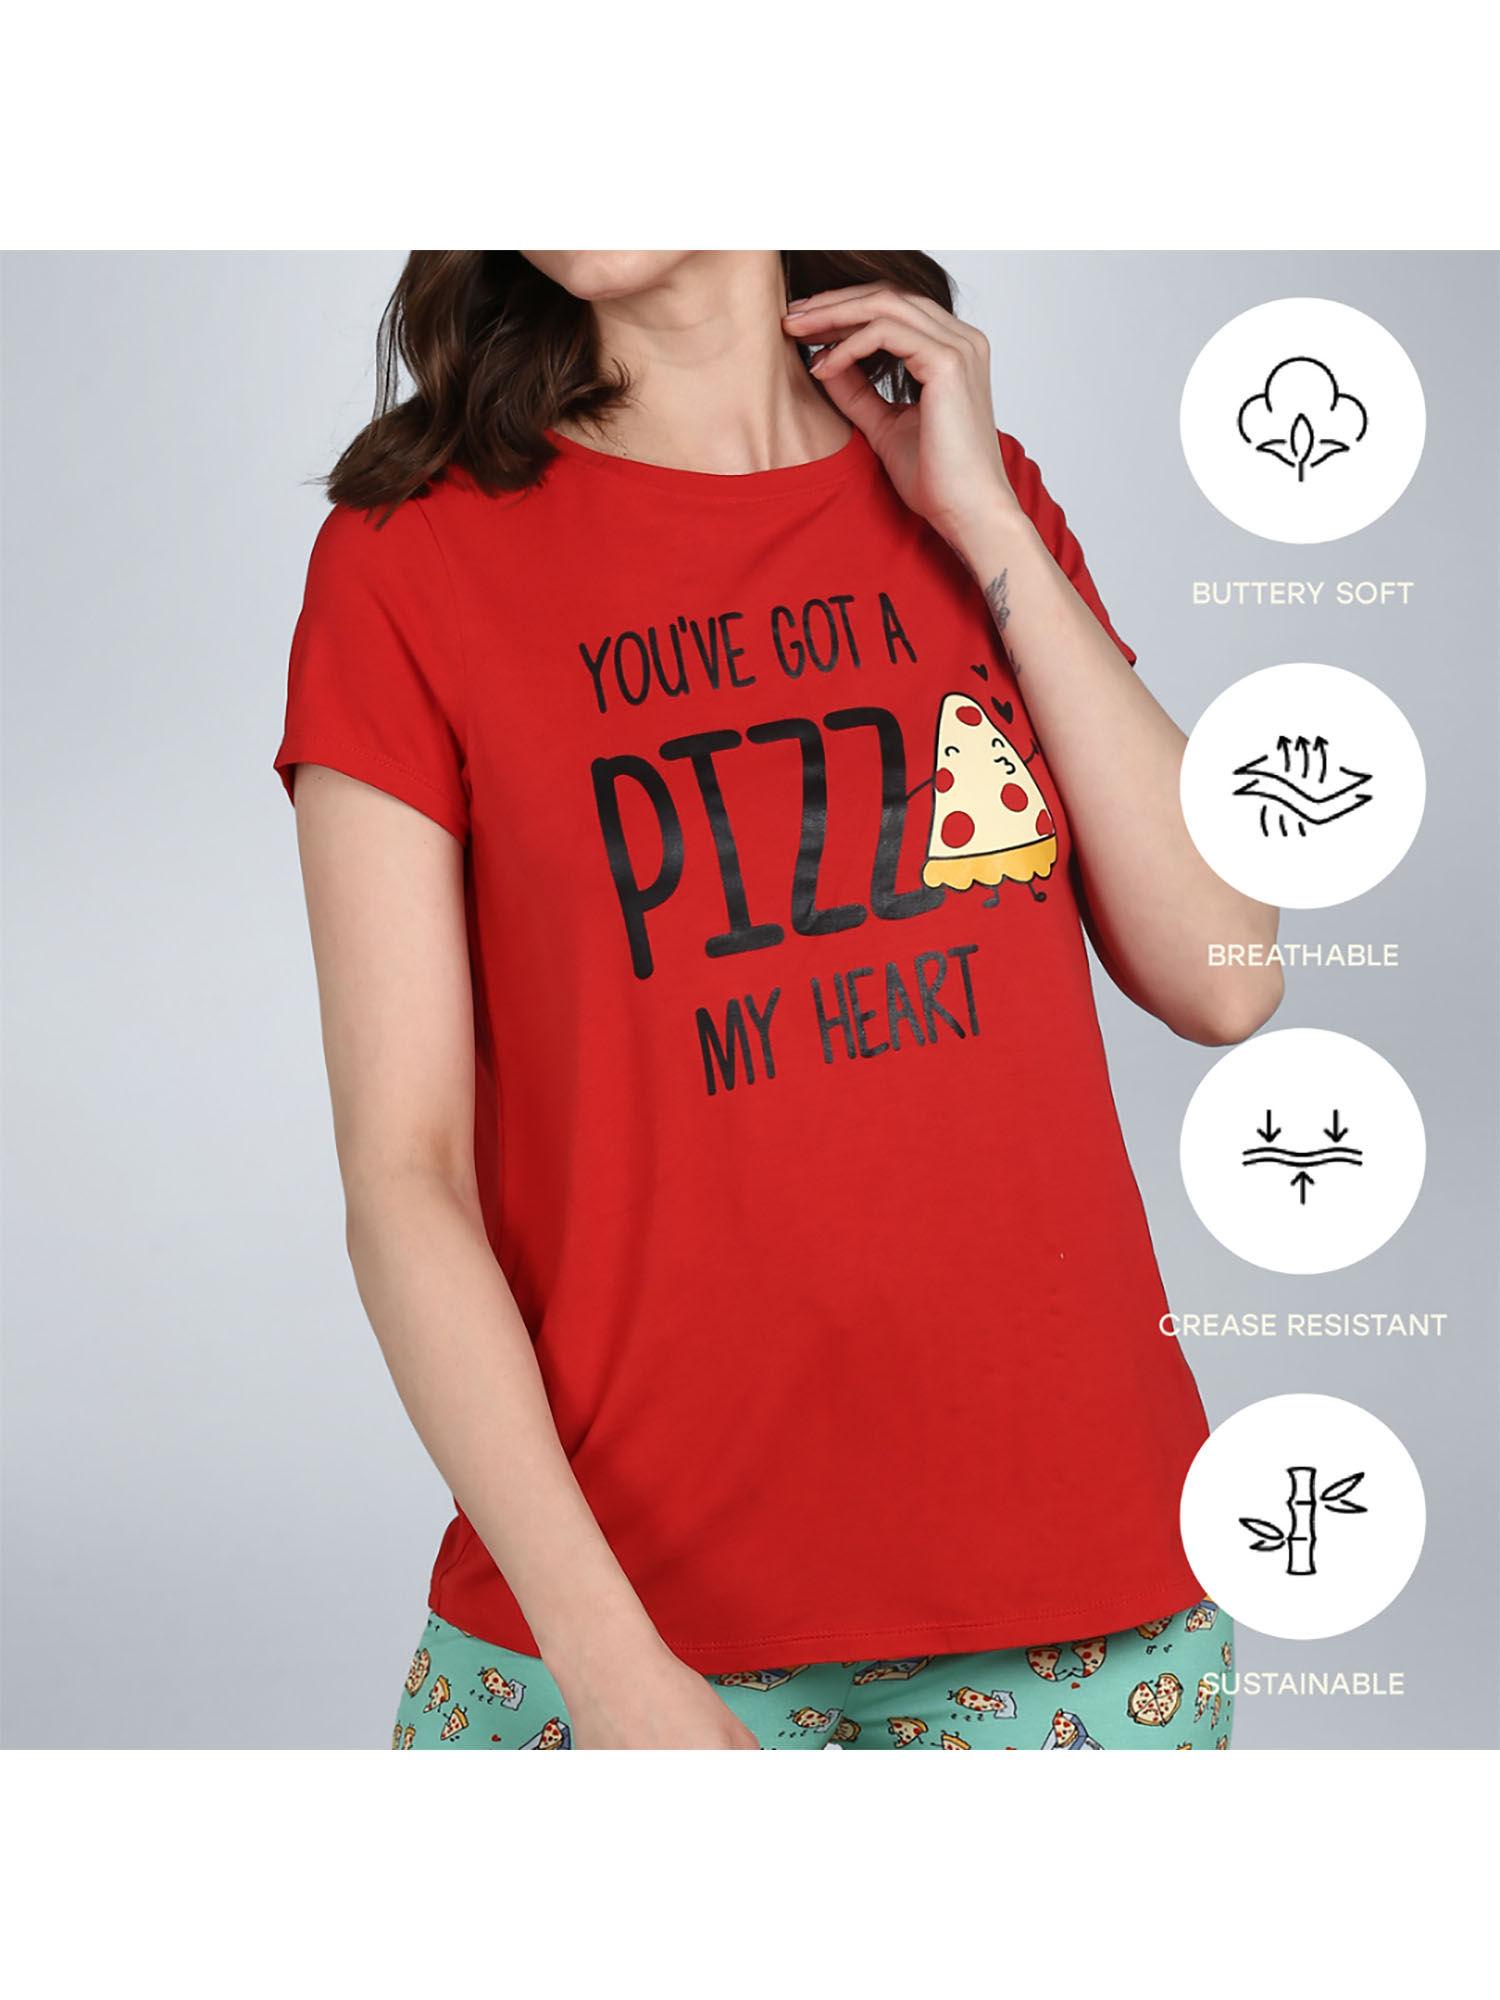 pizza my heart top - red